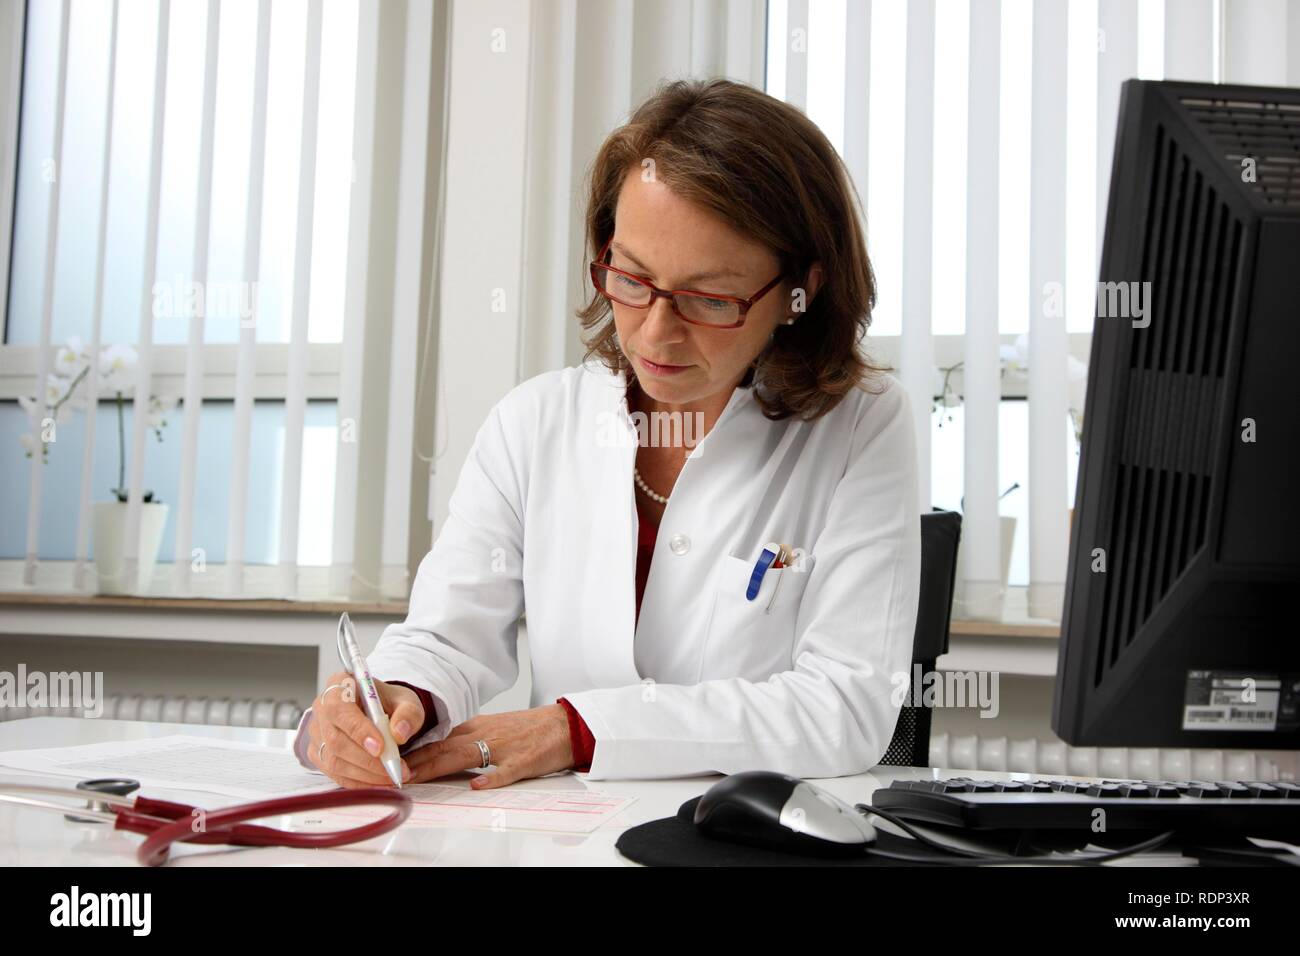 Medical practice, doctor examining the health records of a patient at her desk Stock Photo